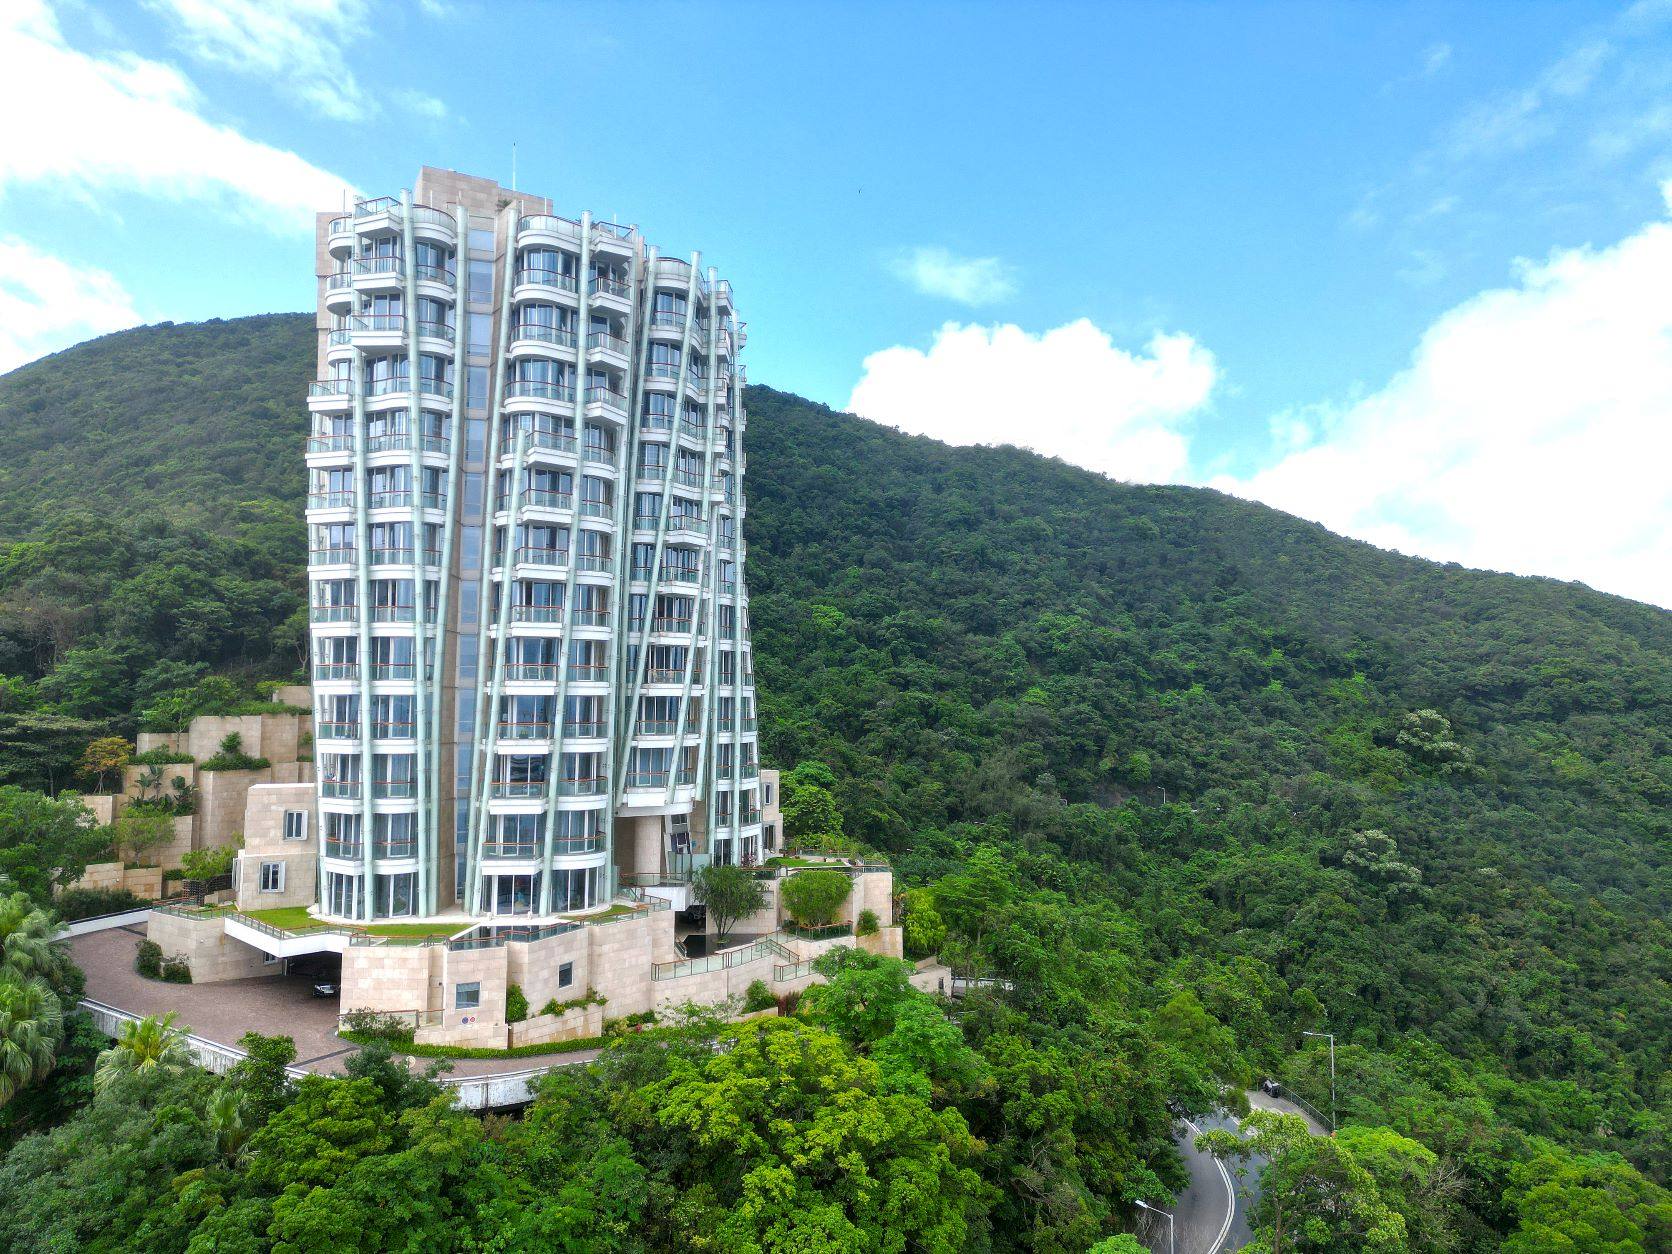 Developed by Swire Properties, Opus Hong Kong is the fruit of a collaboration with Frank Gehry – it is his first and only residential project in Asia. Photo: Handout